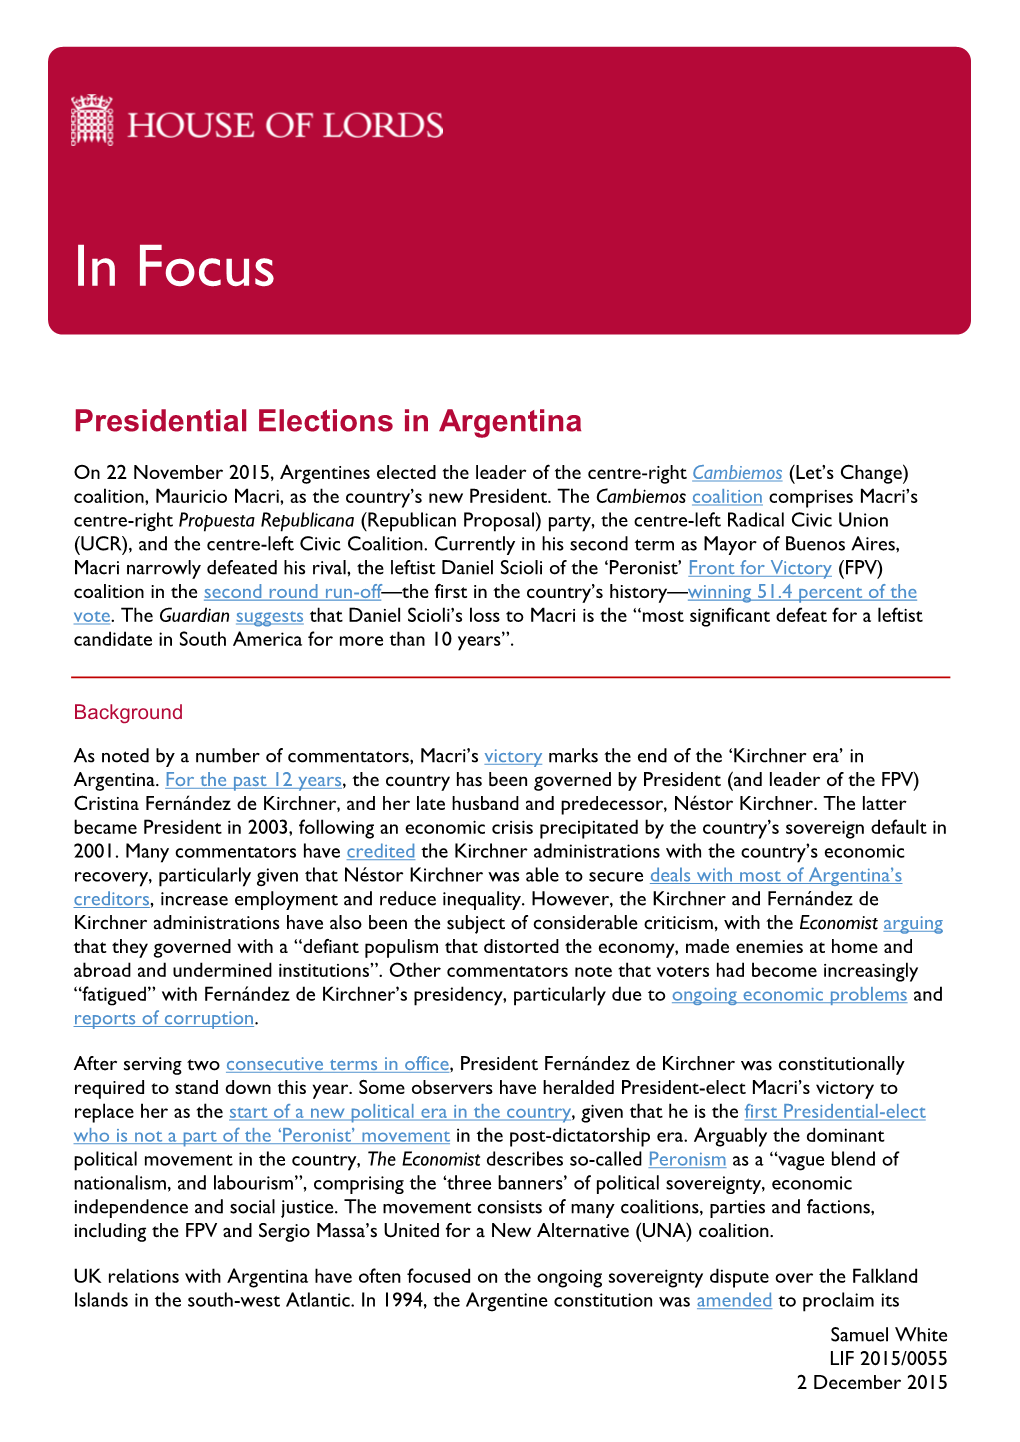 Presidential Elections in Argentina